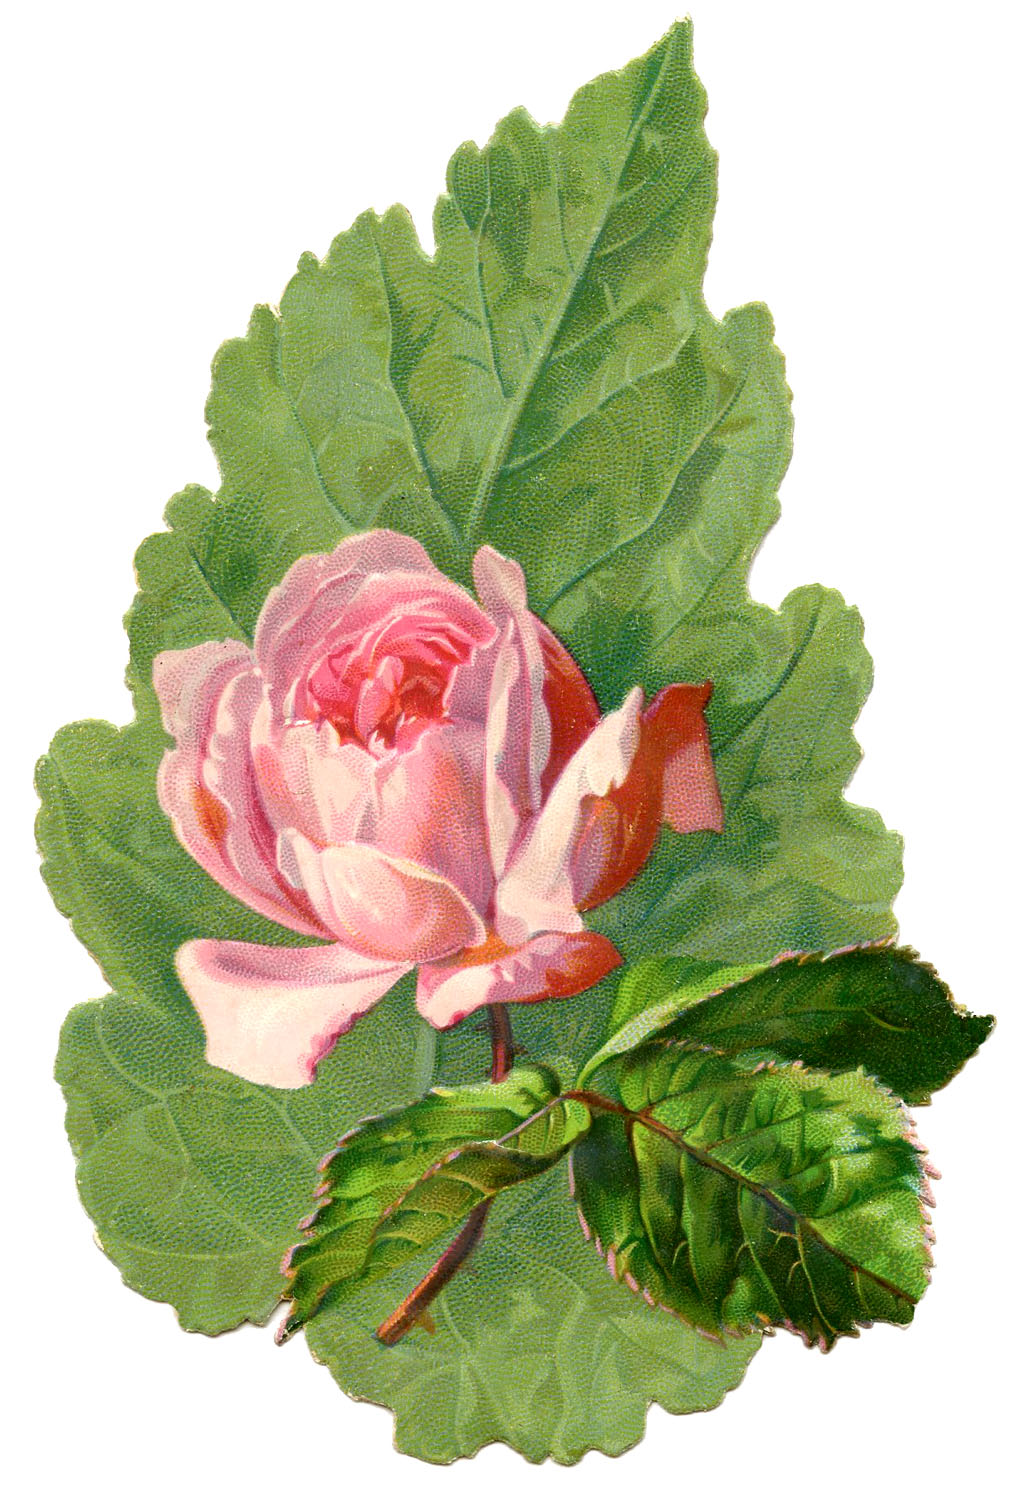 Vintage Image - Extra Pretty Pink Rose with Leaf - The ...